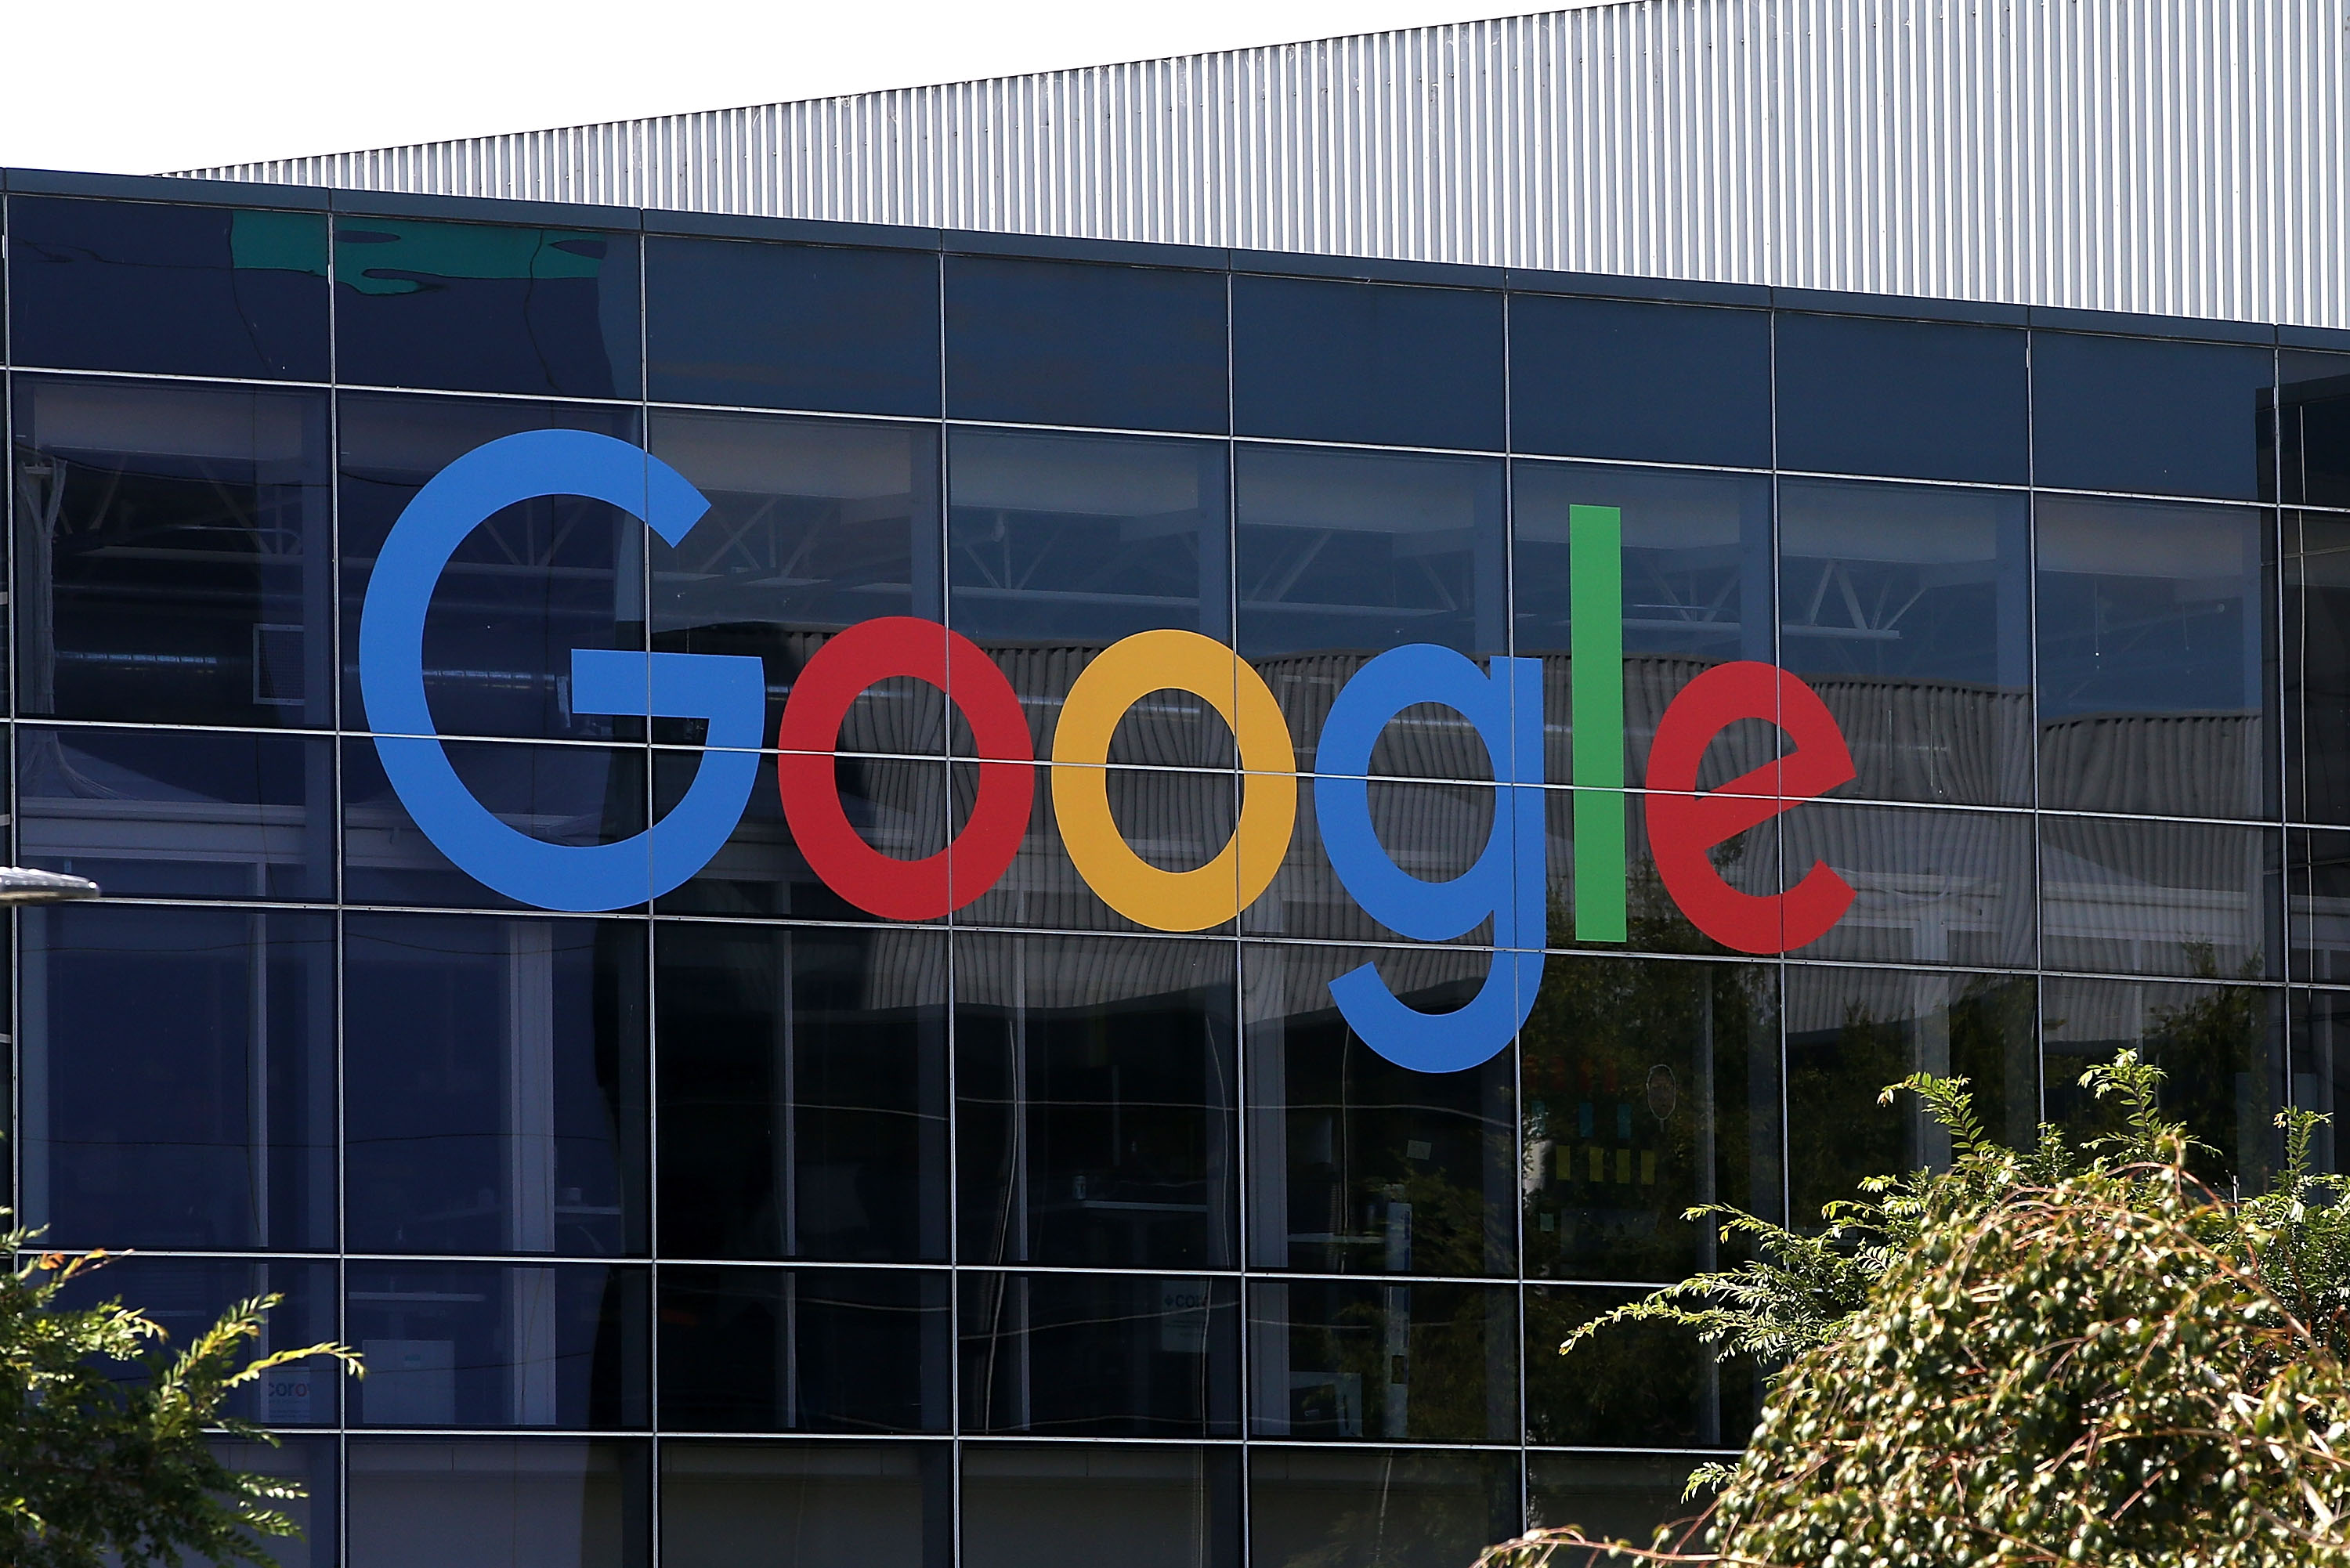 Man Arrested for Attacks on Google Headquarters